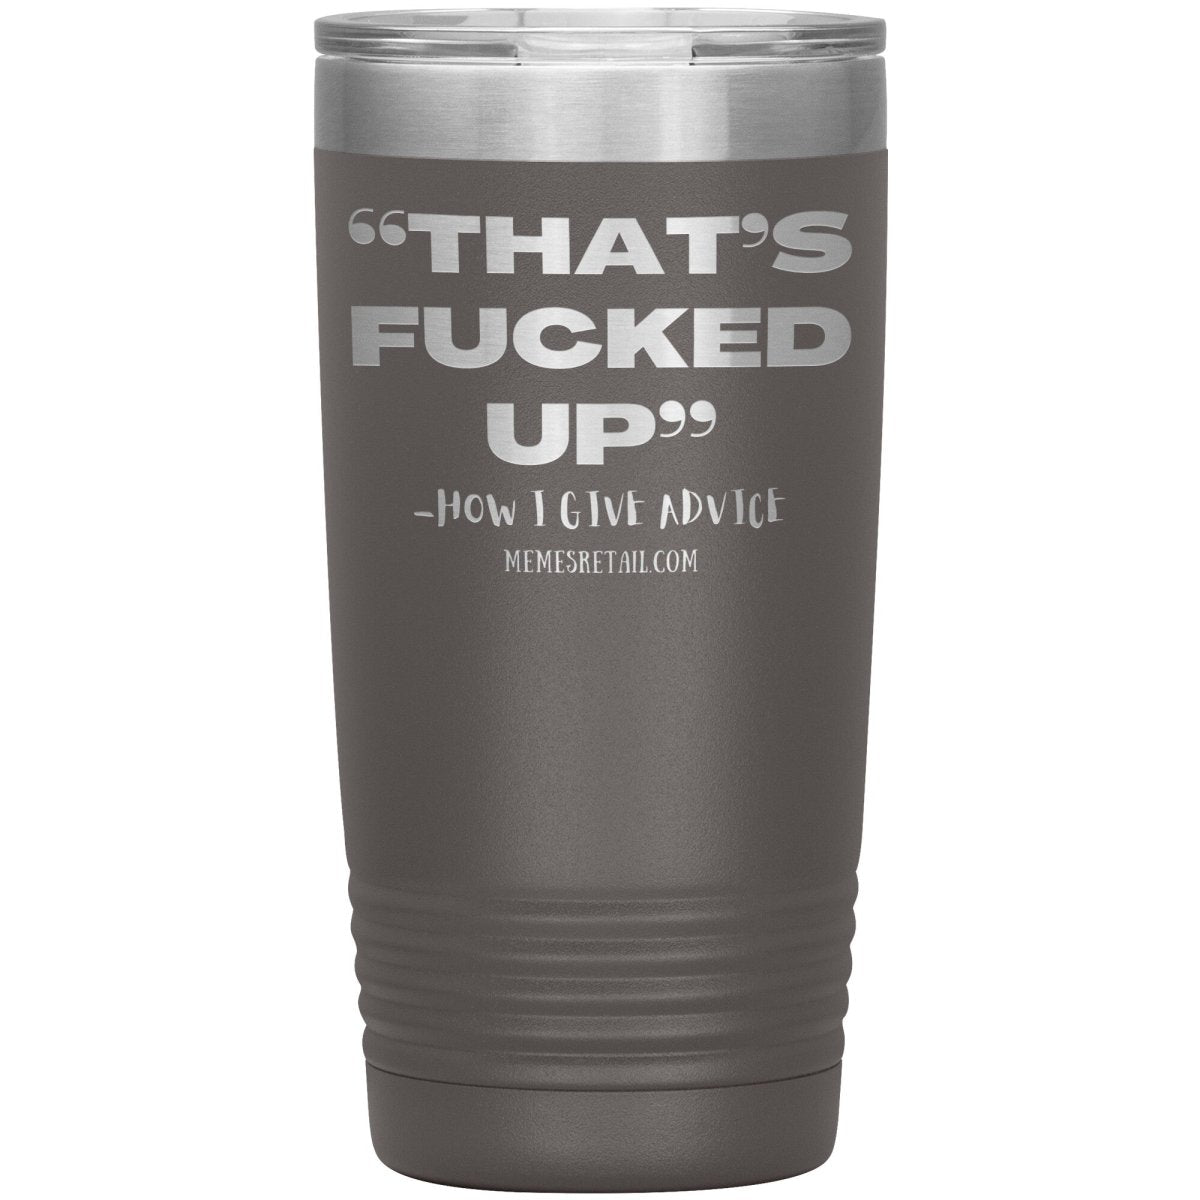 “That’s Fucked Up” -how I give advice Tumblers, 20oz Insulated Tumbler / Pewter - MemesRetail.com